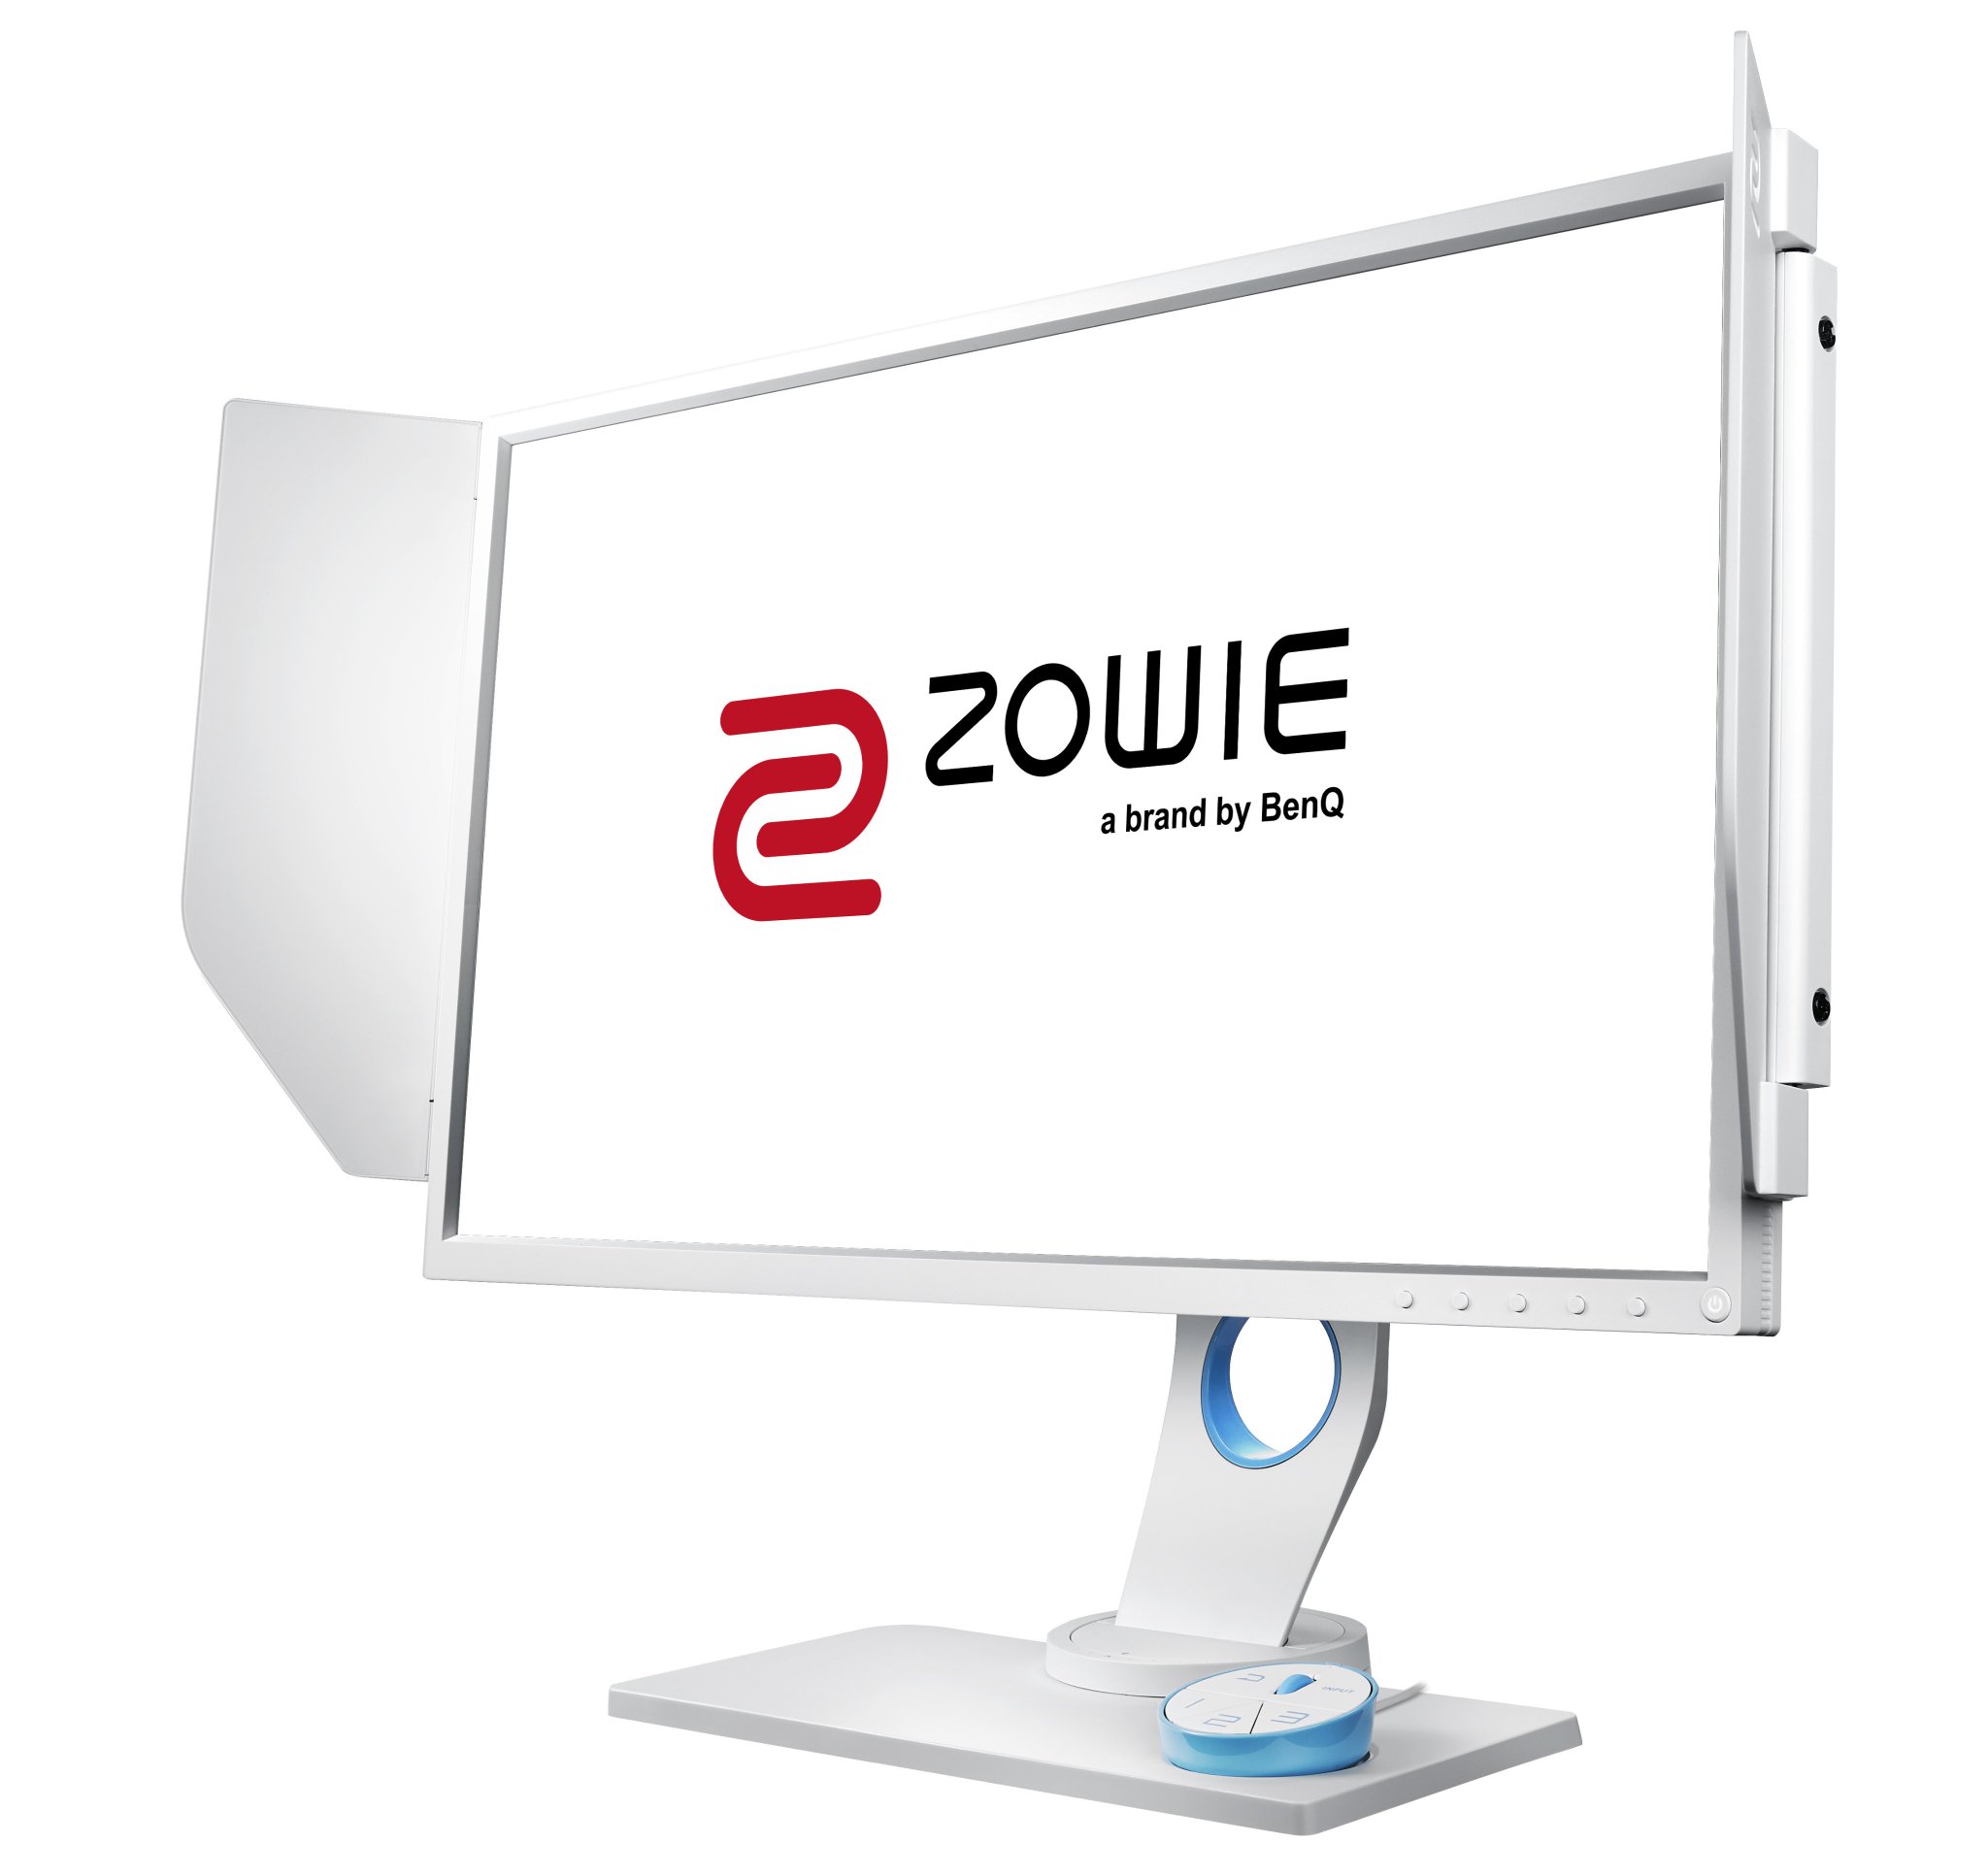 Zowie Europe Zowie Xl2546 Divina With Dyac And 240hz Are Ready For Pre Order On Our German Partner Alternate De Pre Order Now T Co Nqvjulyyld T Co 3nigu6ye3z